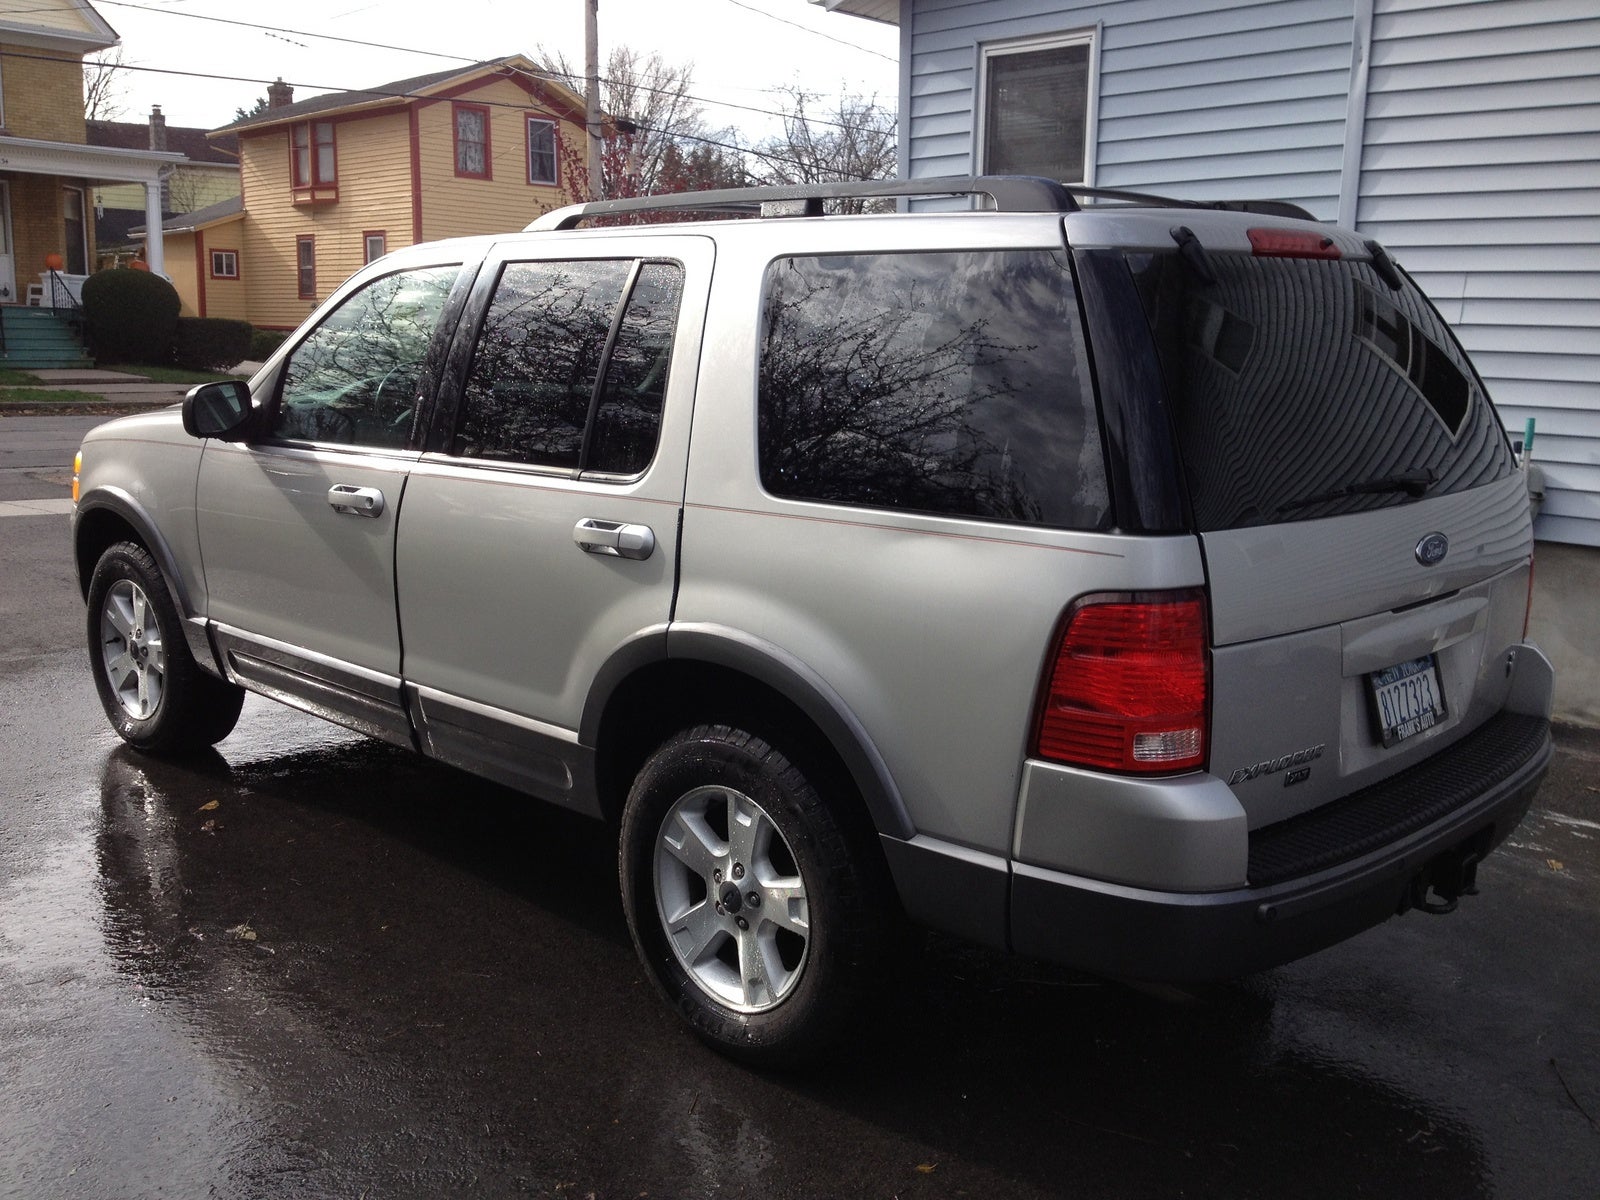 2004 Ford Explorer Sport Trac Xlt Towing Capacity